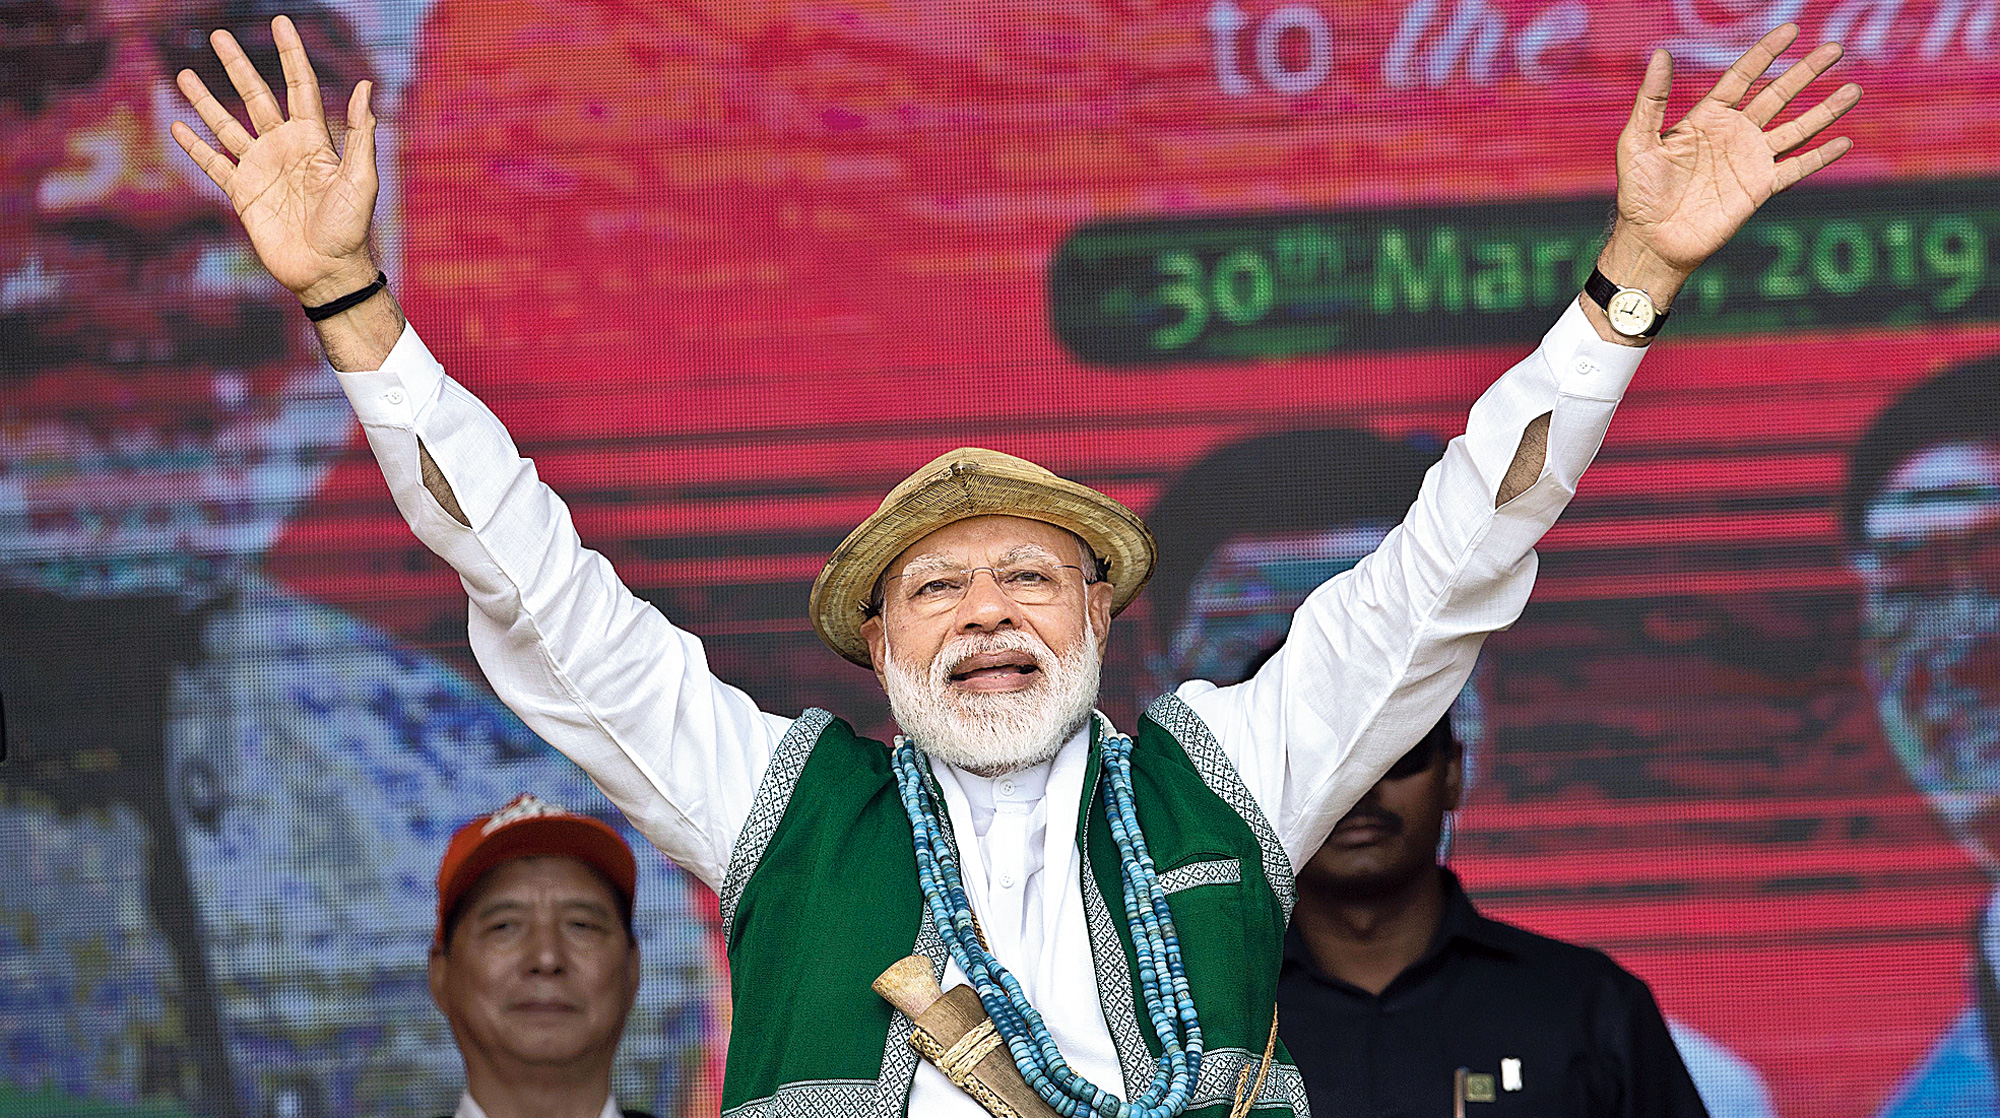 Prime Minister Narendra Modi waves to BJP supporters at the rally in Arunachal Pradesh’s Aalo on Saturday.